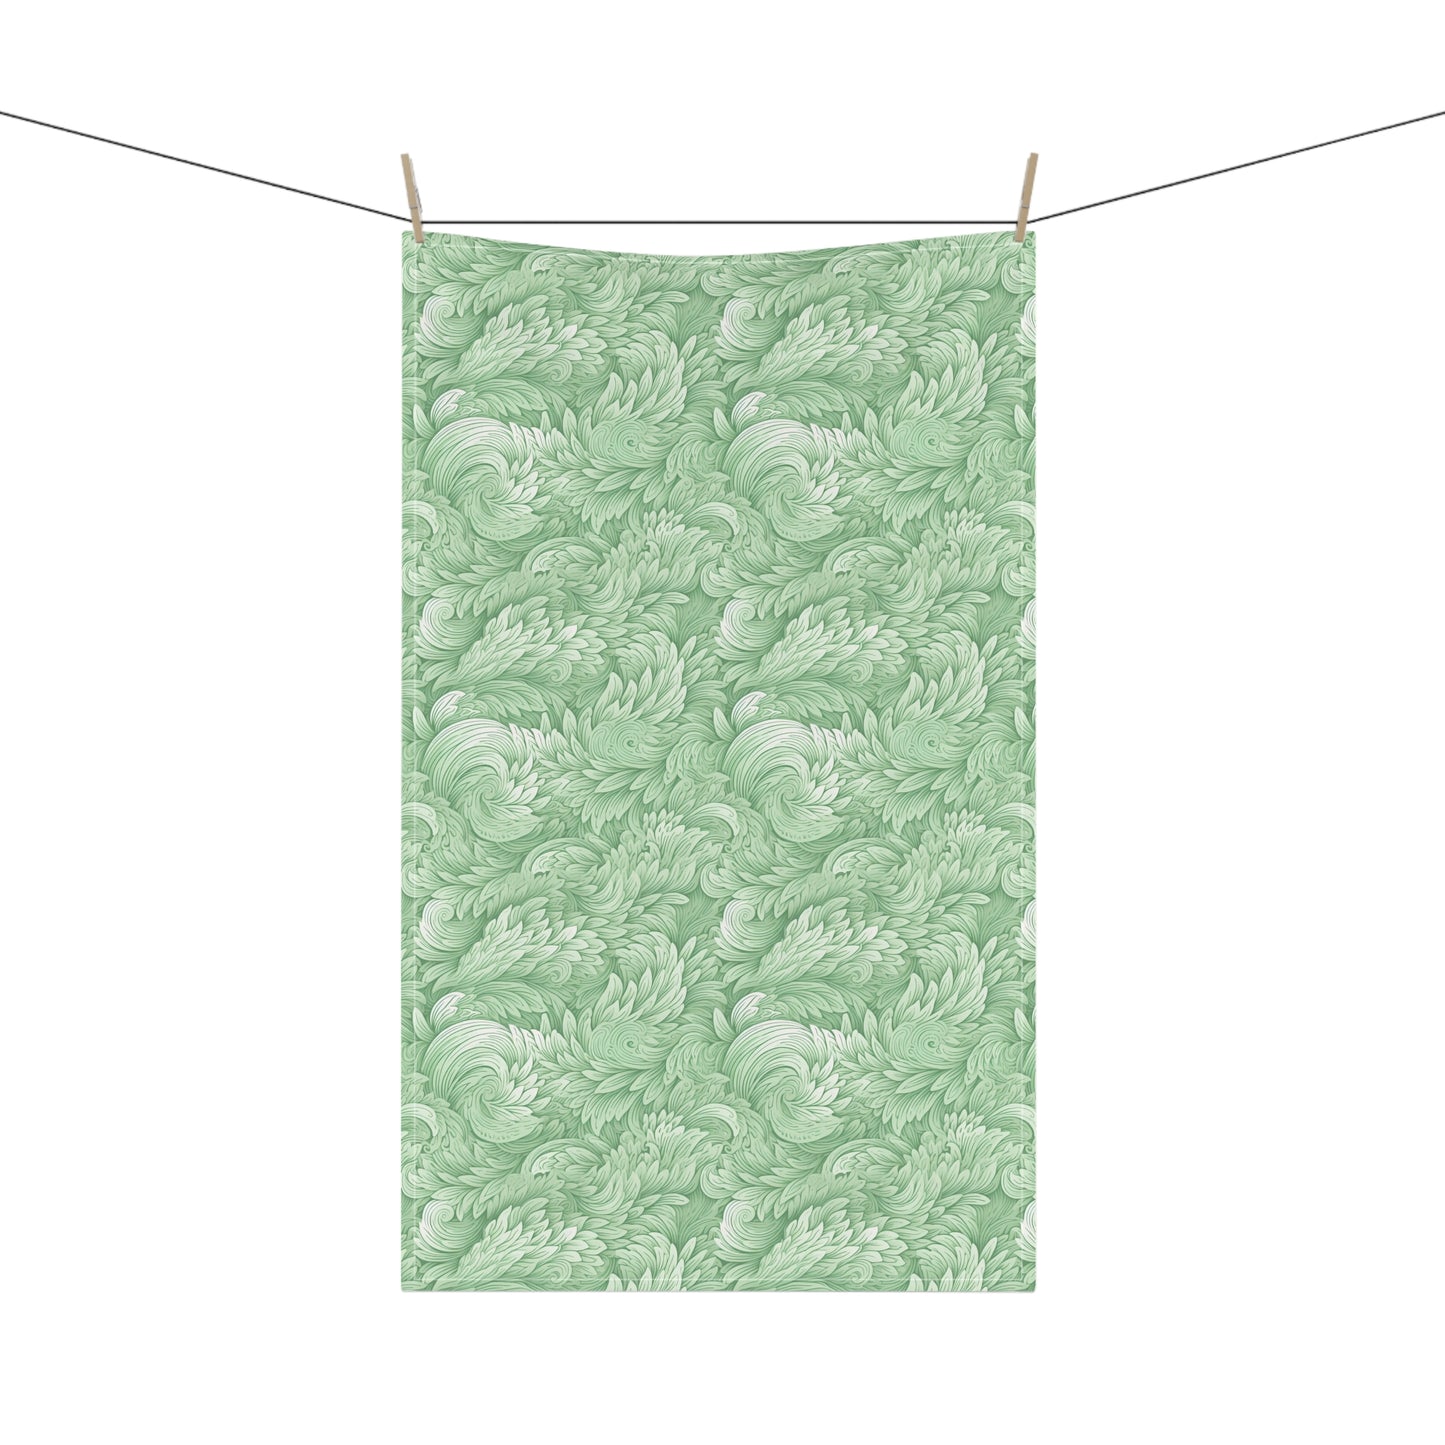 WhisperPrint - Refreshing Grass Green Pattern Cotton Twill Kitchen Towel - Perfect Gift for Hobby Chef / Cozy Home